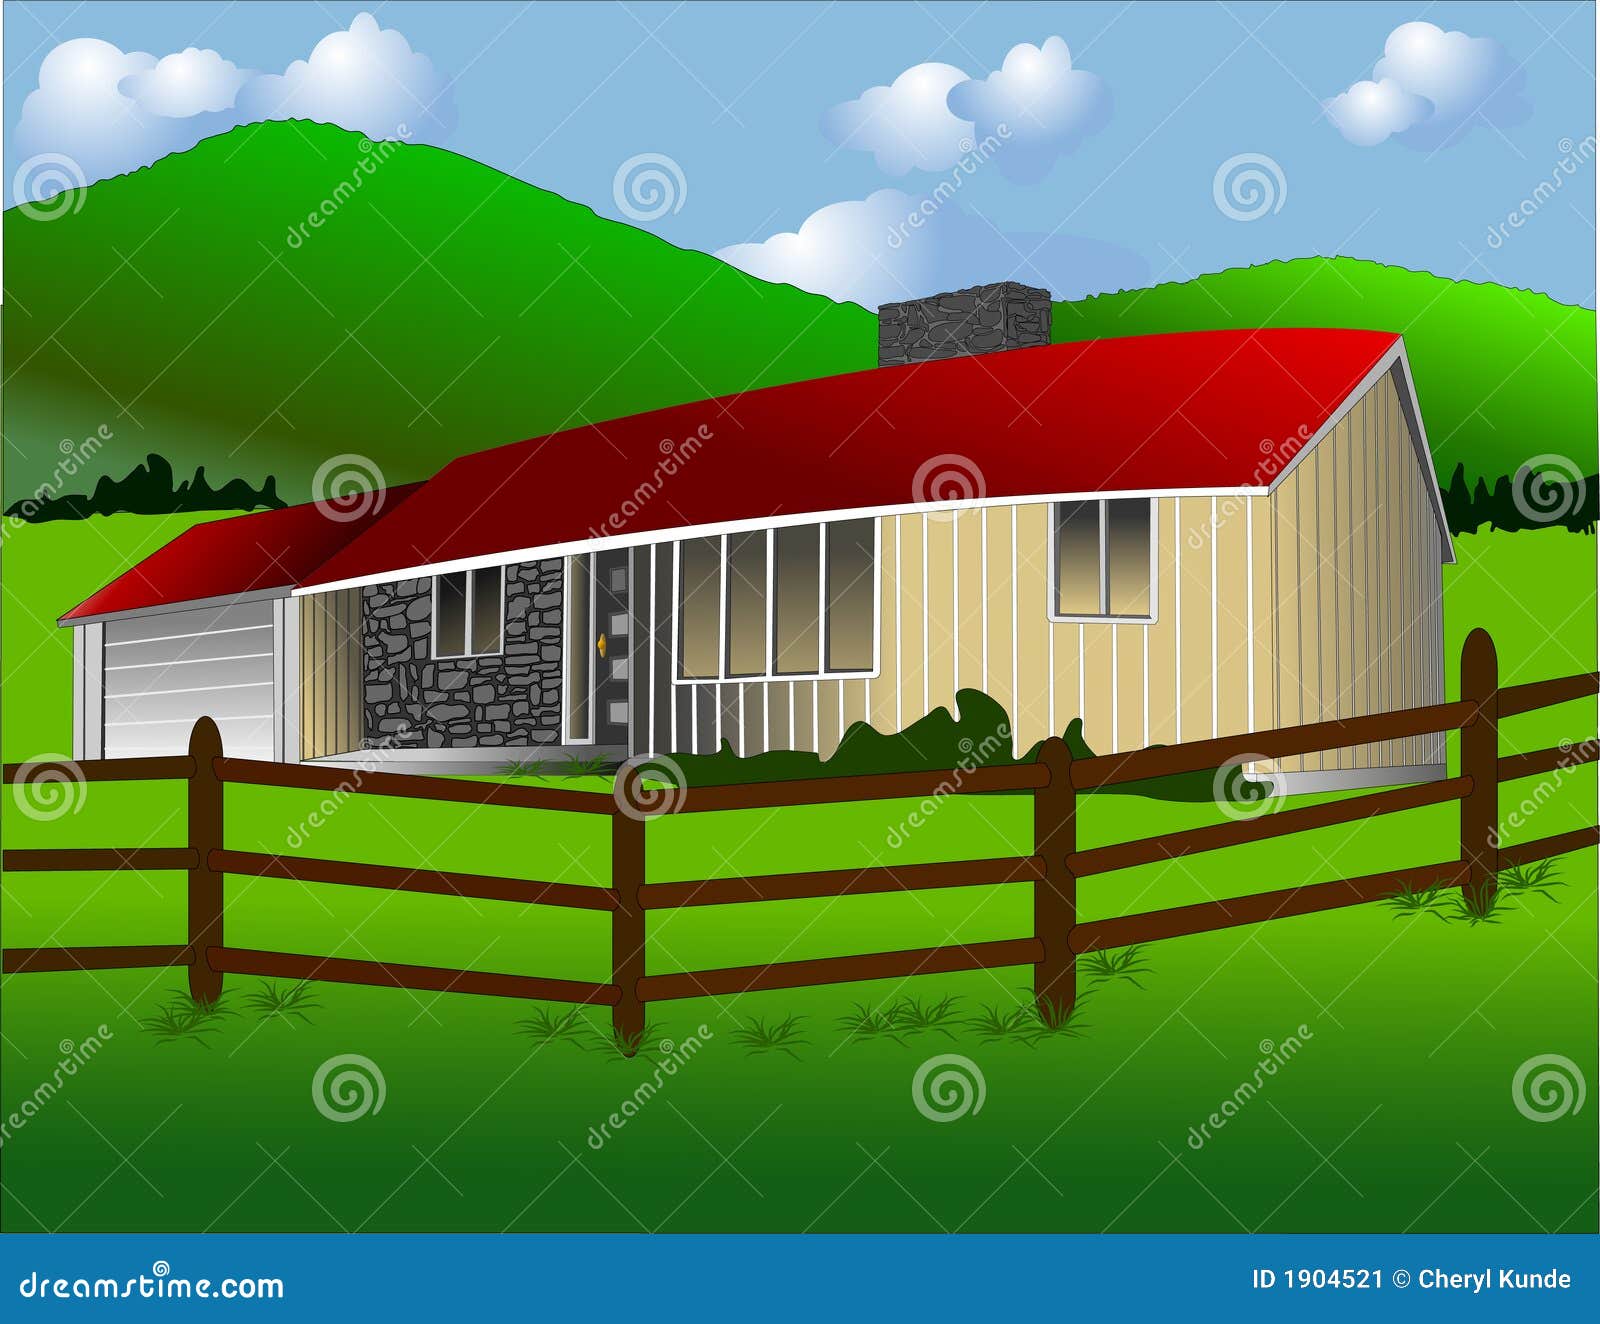 ranch house clipart - photo #9